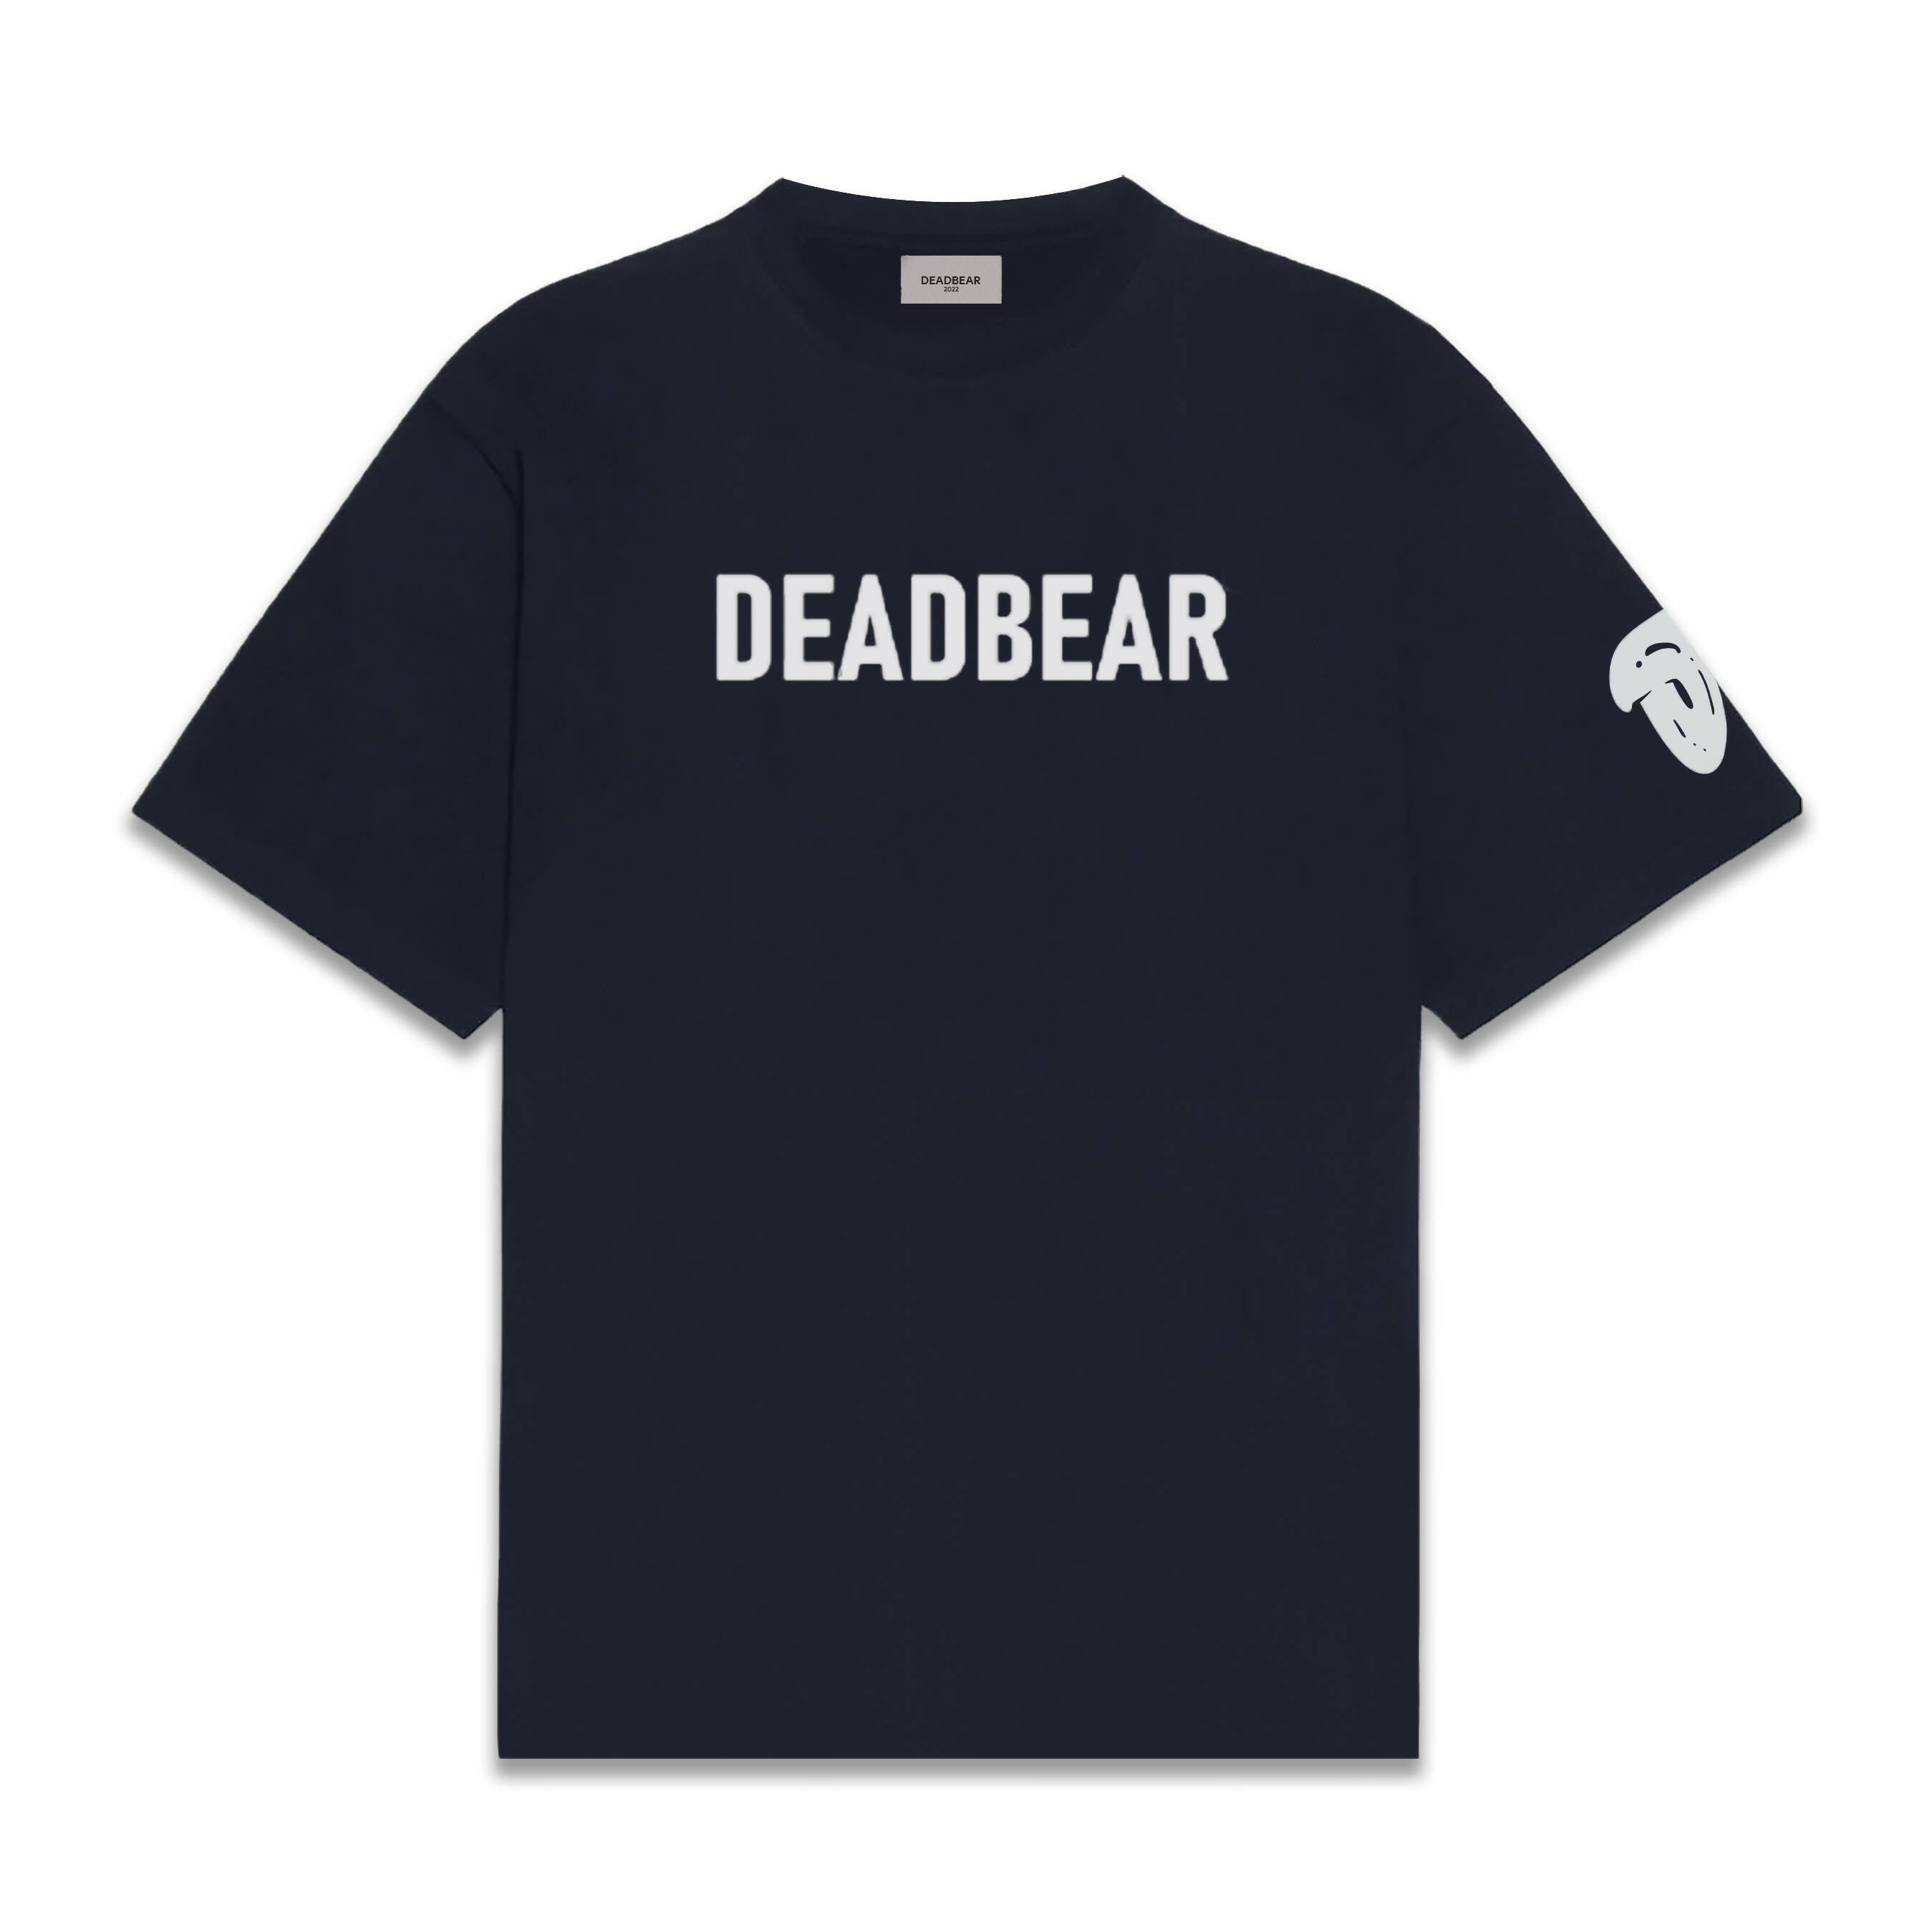 More Dead Than Alive Blue Tee